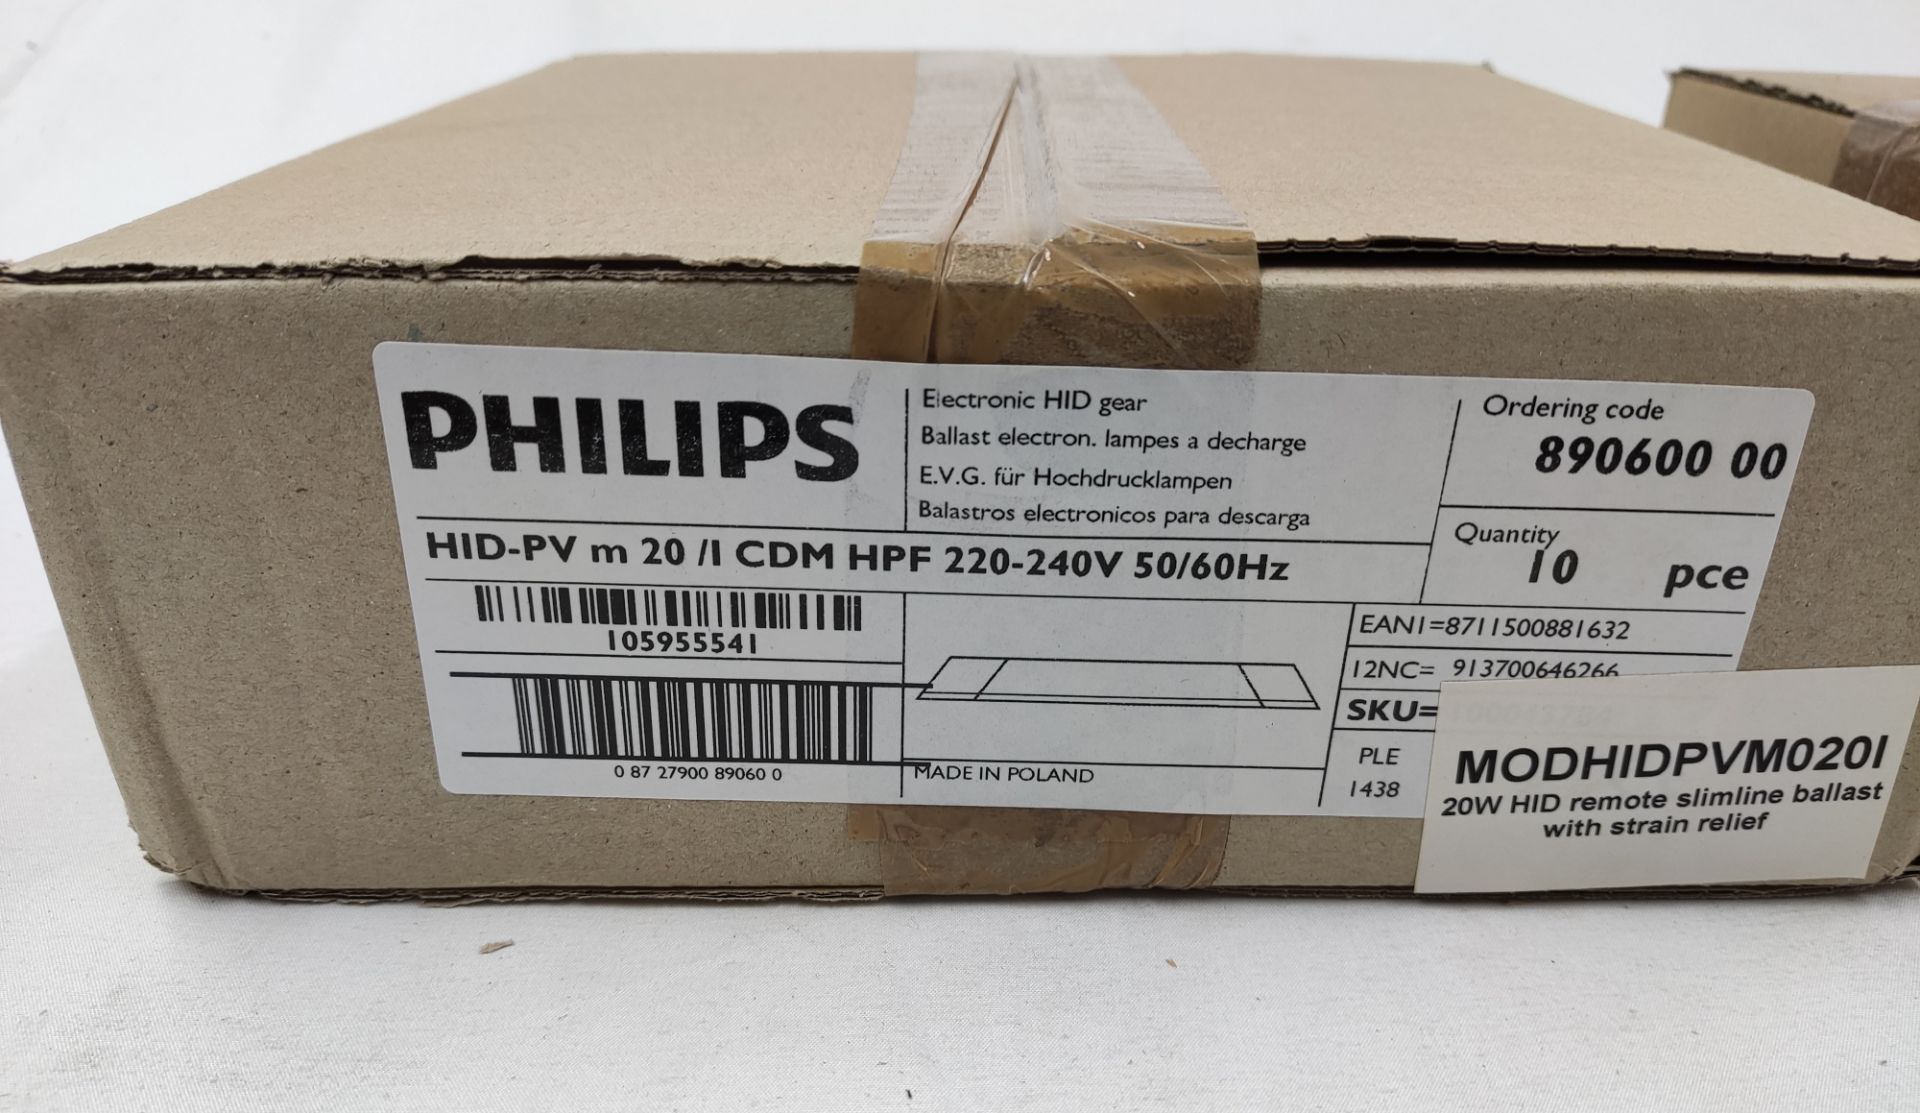 10 x PHILIPS Electronic Drivers For Hid Lamps - Hid-Pv M 20/I Cdm Hpf 220-240V 50/60Hz - Remote - Image 4 of 4